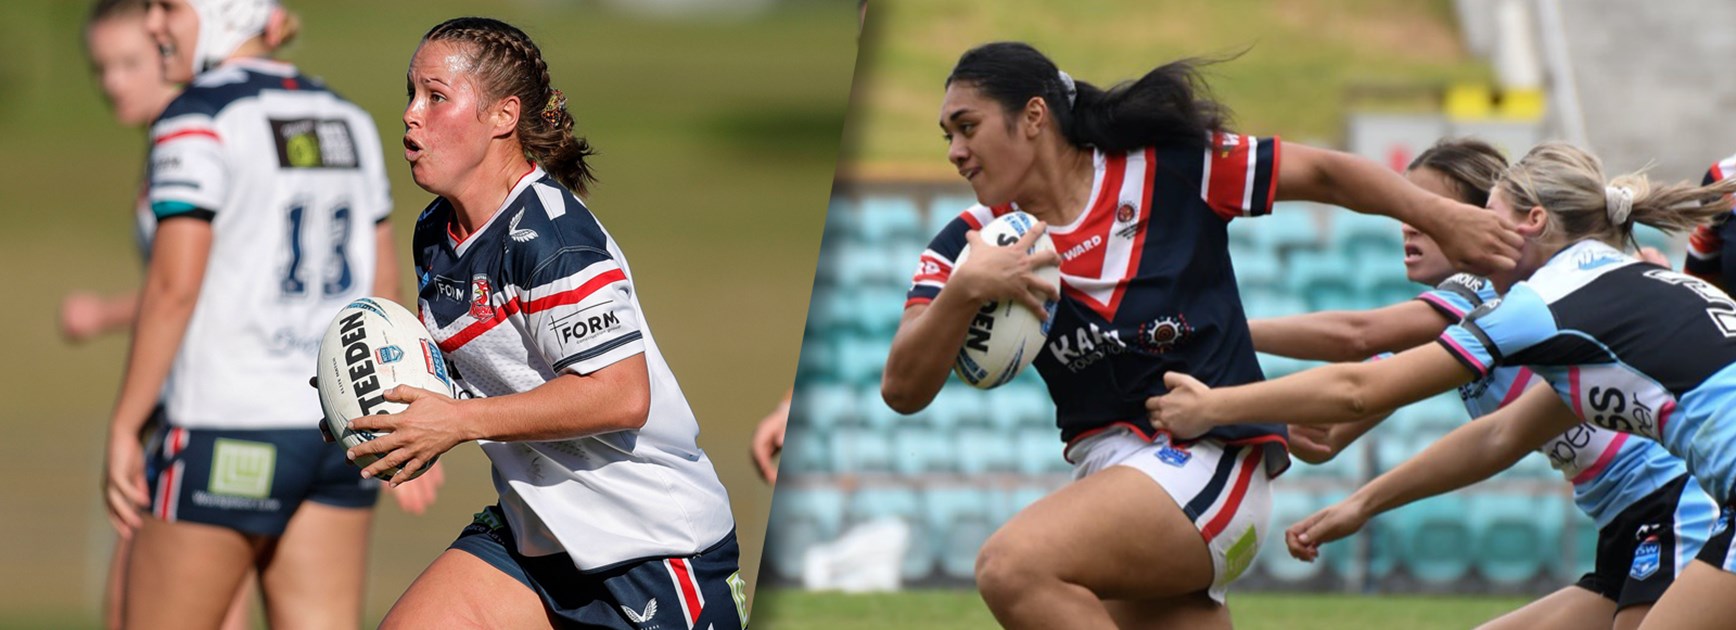 Rookie Roosters Ready to Take NRLW by Storm